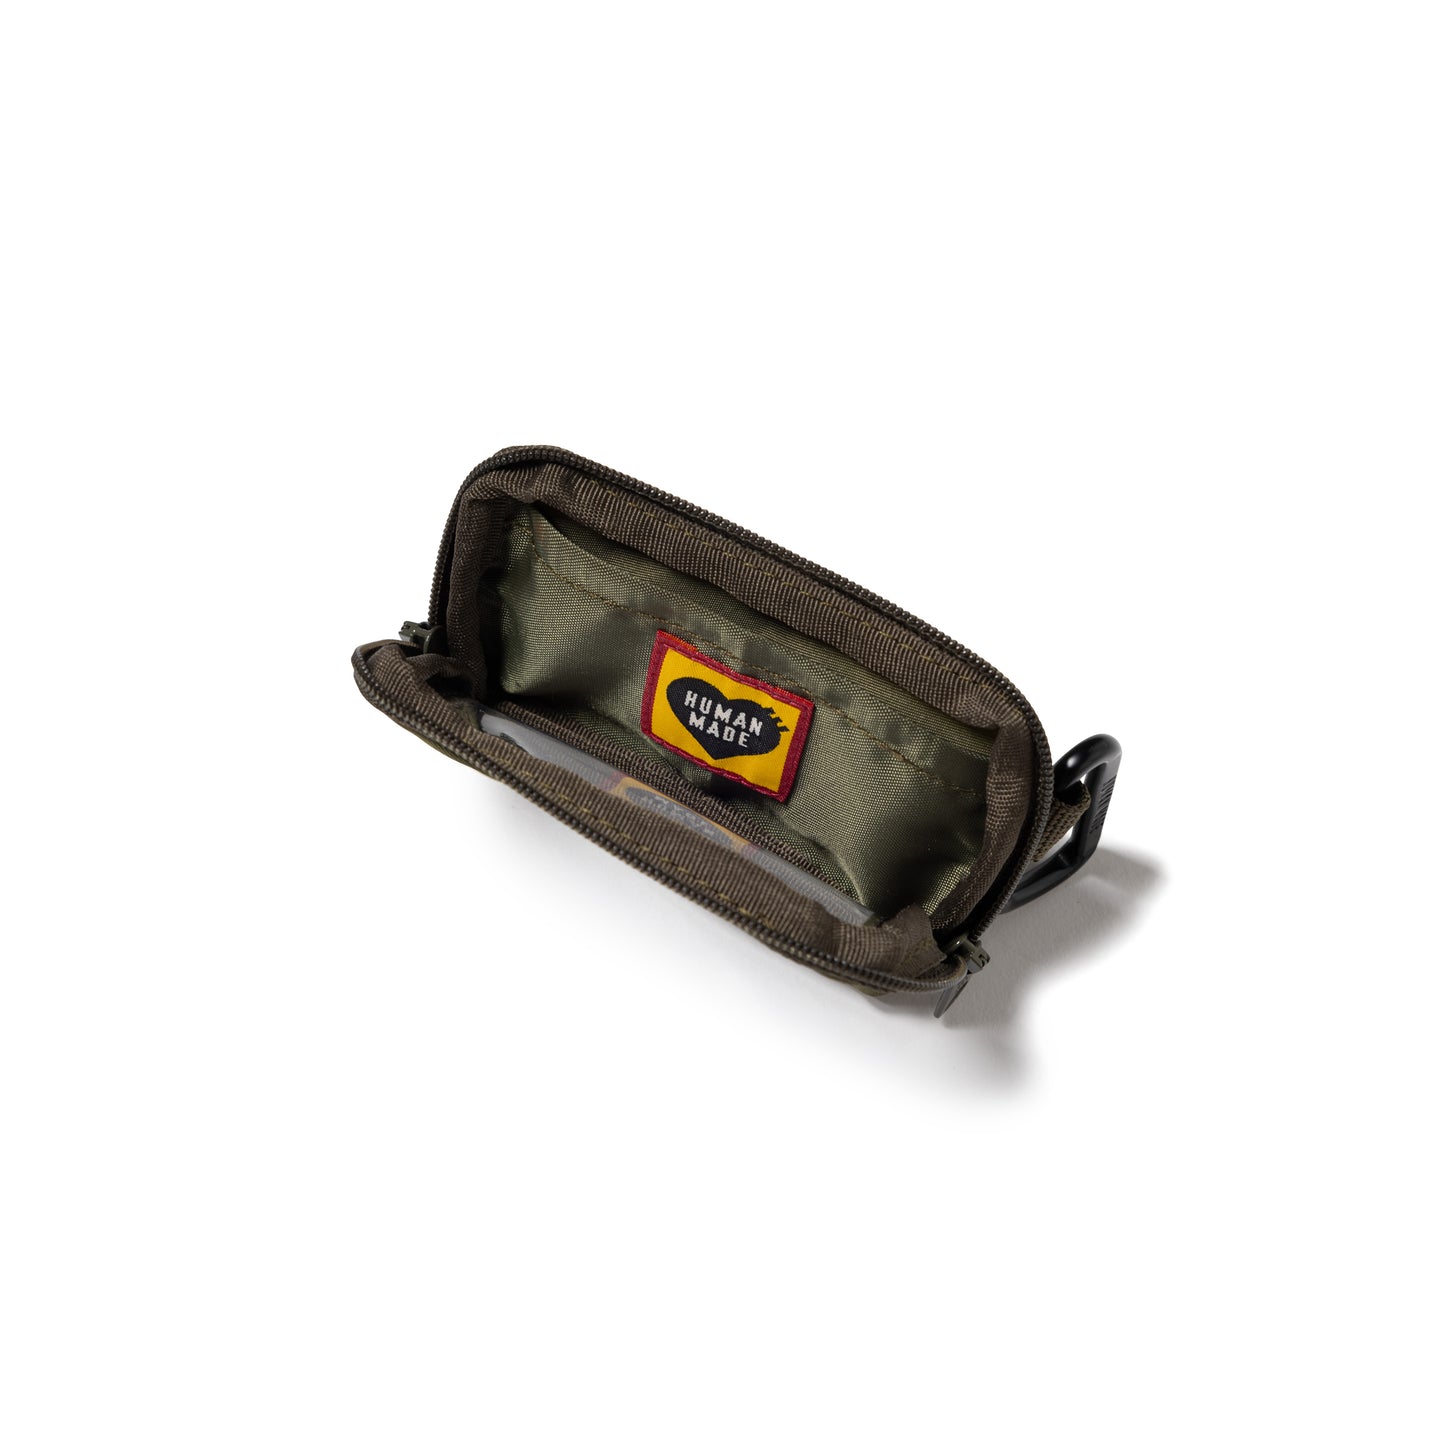 HUMAN MADE MILITARY CARD CASE OD-C